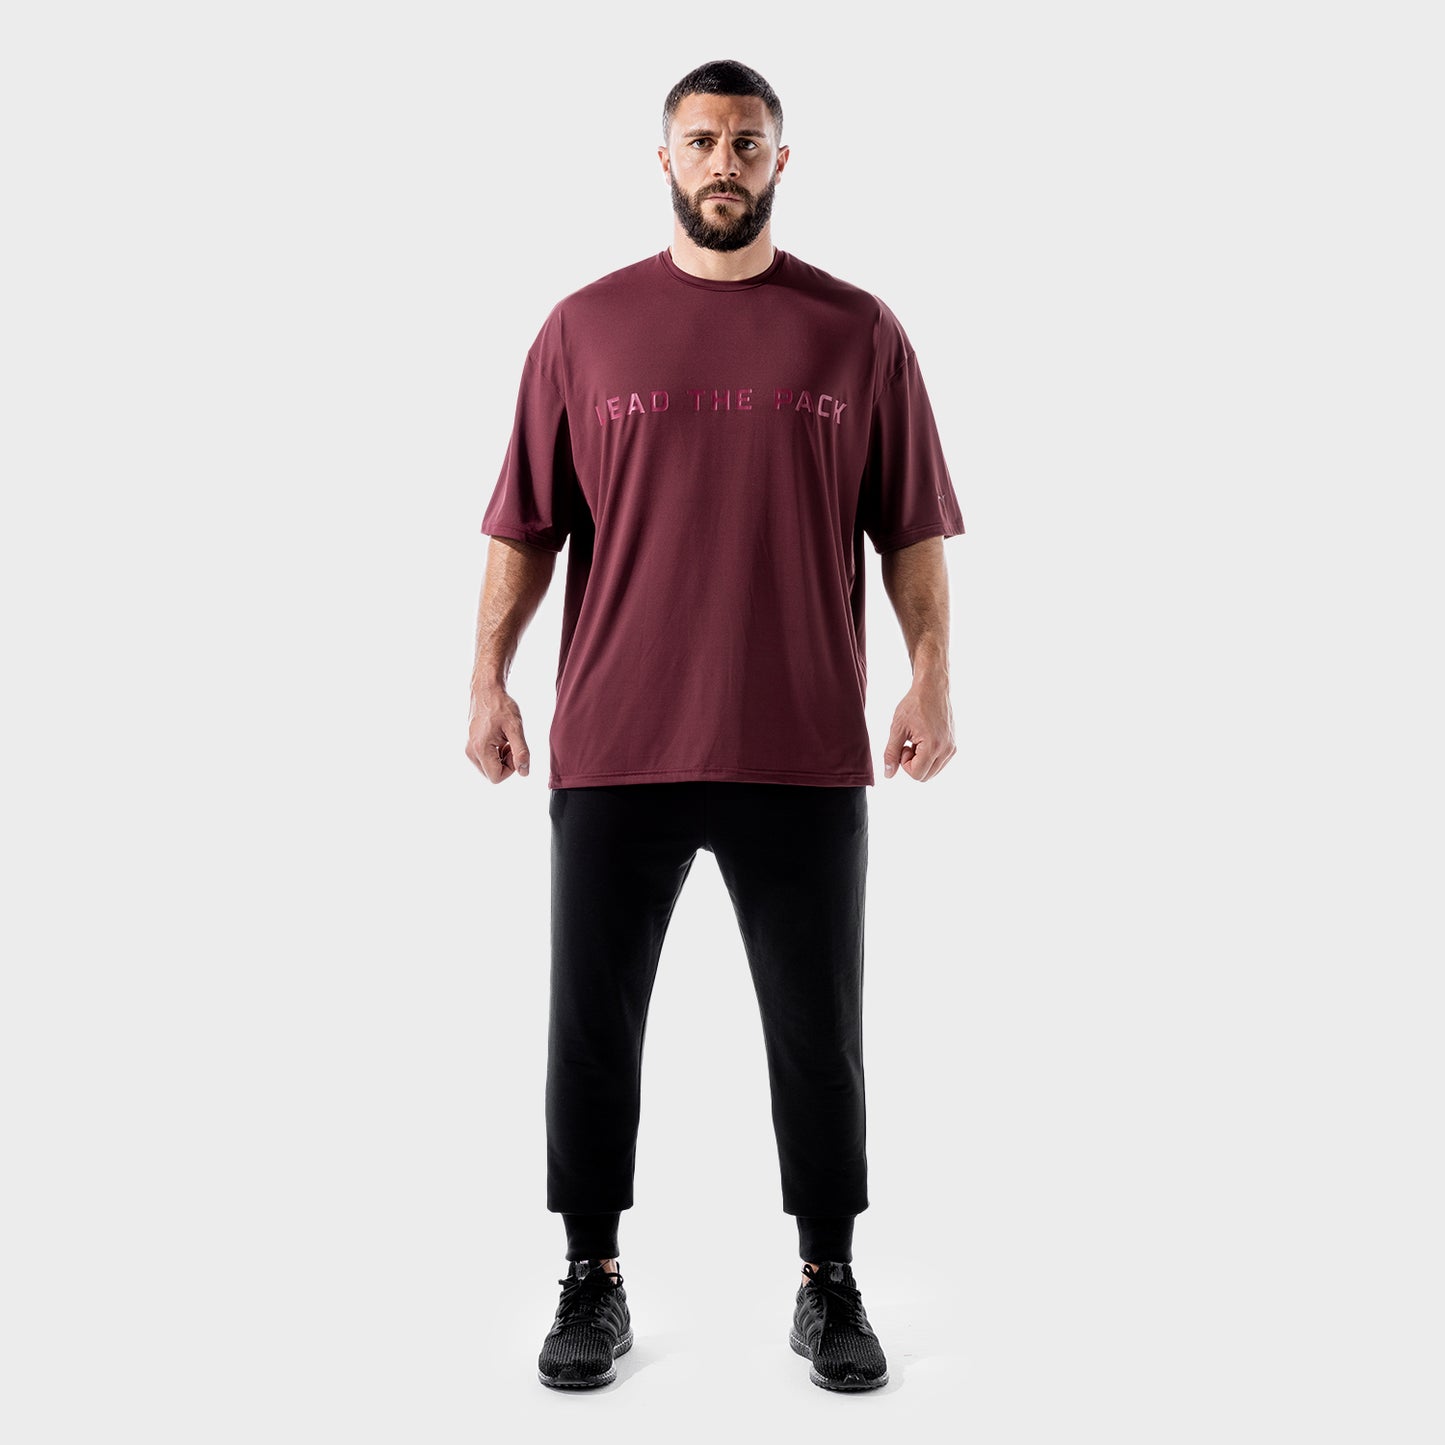 squatwolf-gym-wear-lab-360-oversized-tee-maroon-workout-shirts-for-men